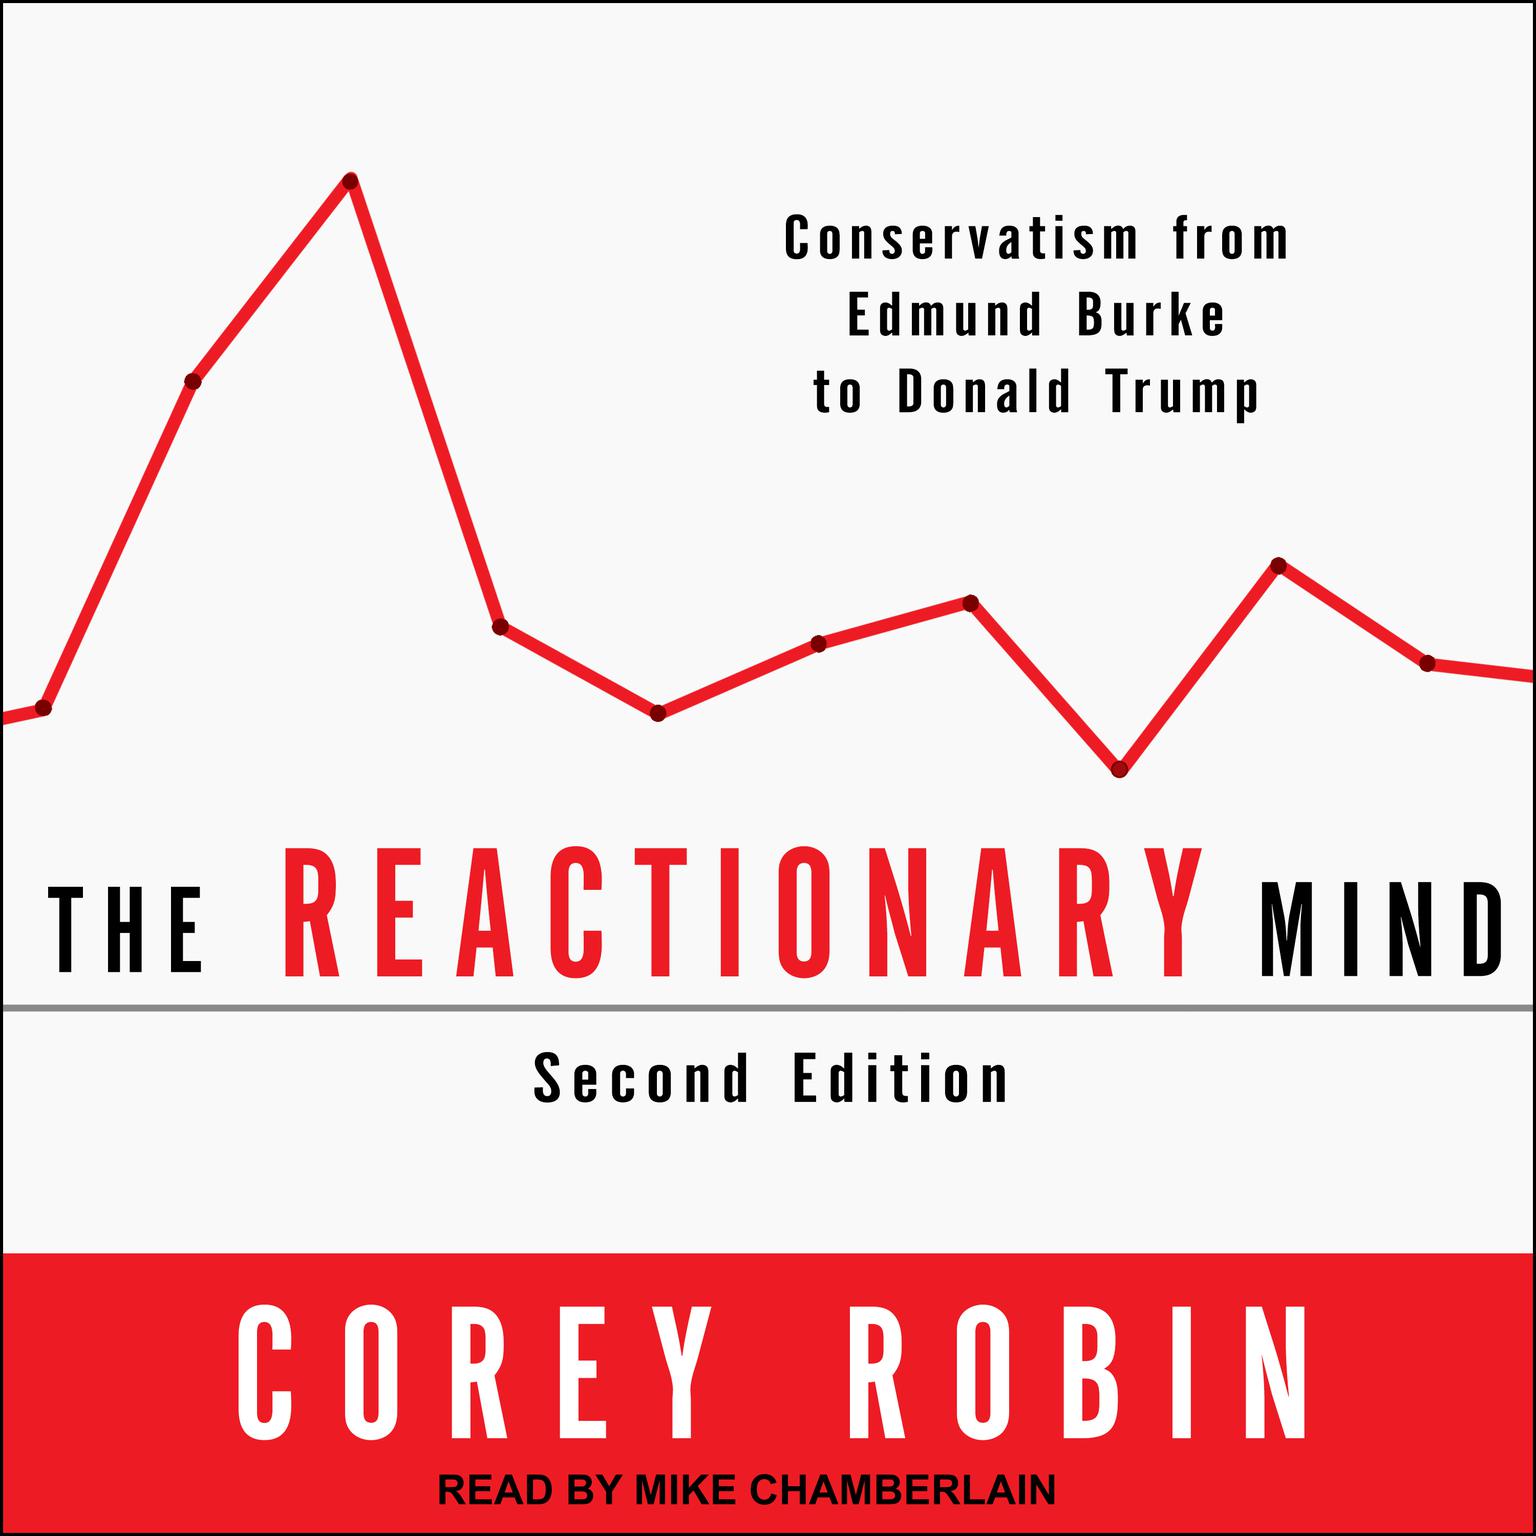 The Reactionary Mind: Conservatism from Edmund Burke to Donald Trump Audiobook, by Corey Robin